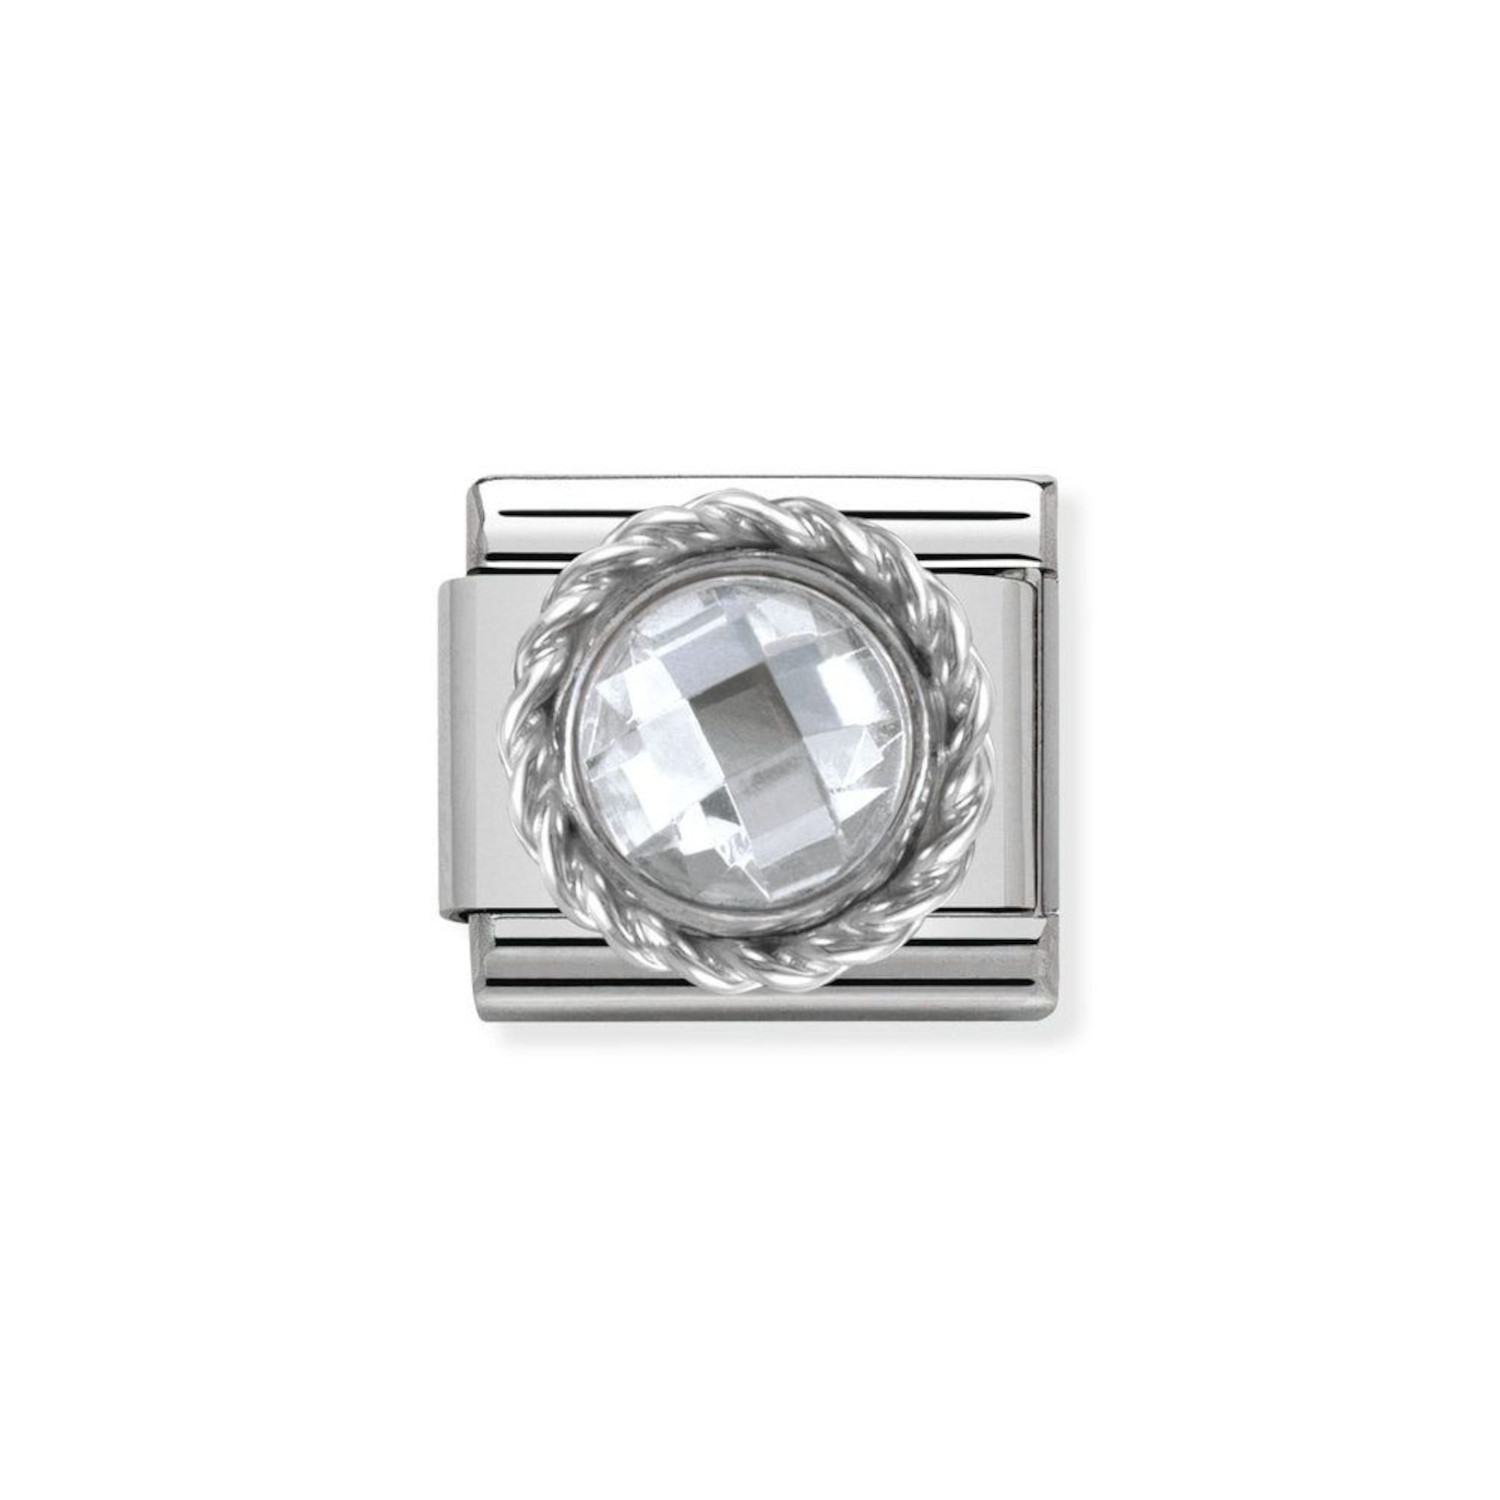 NOMINATION COMPOSABLE CLASSIC LINK IN STERLING SILVER WITH ROUND FACETED WHITE STONE 330601/010